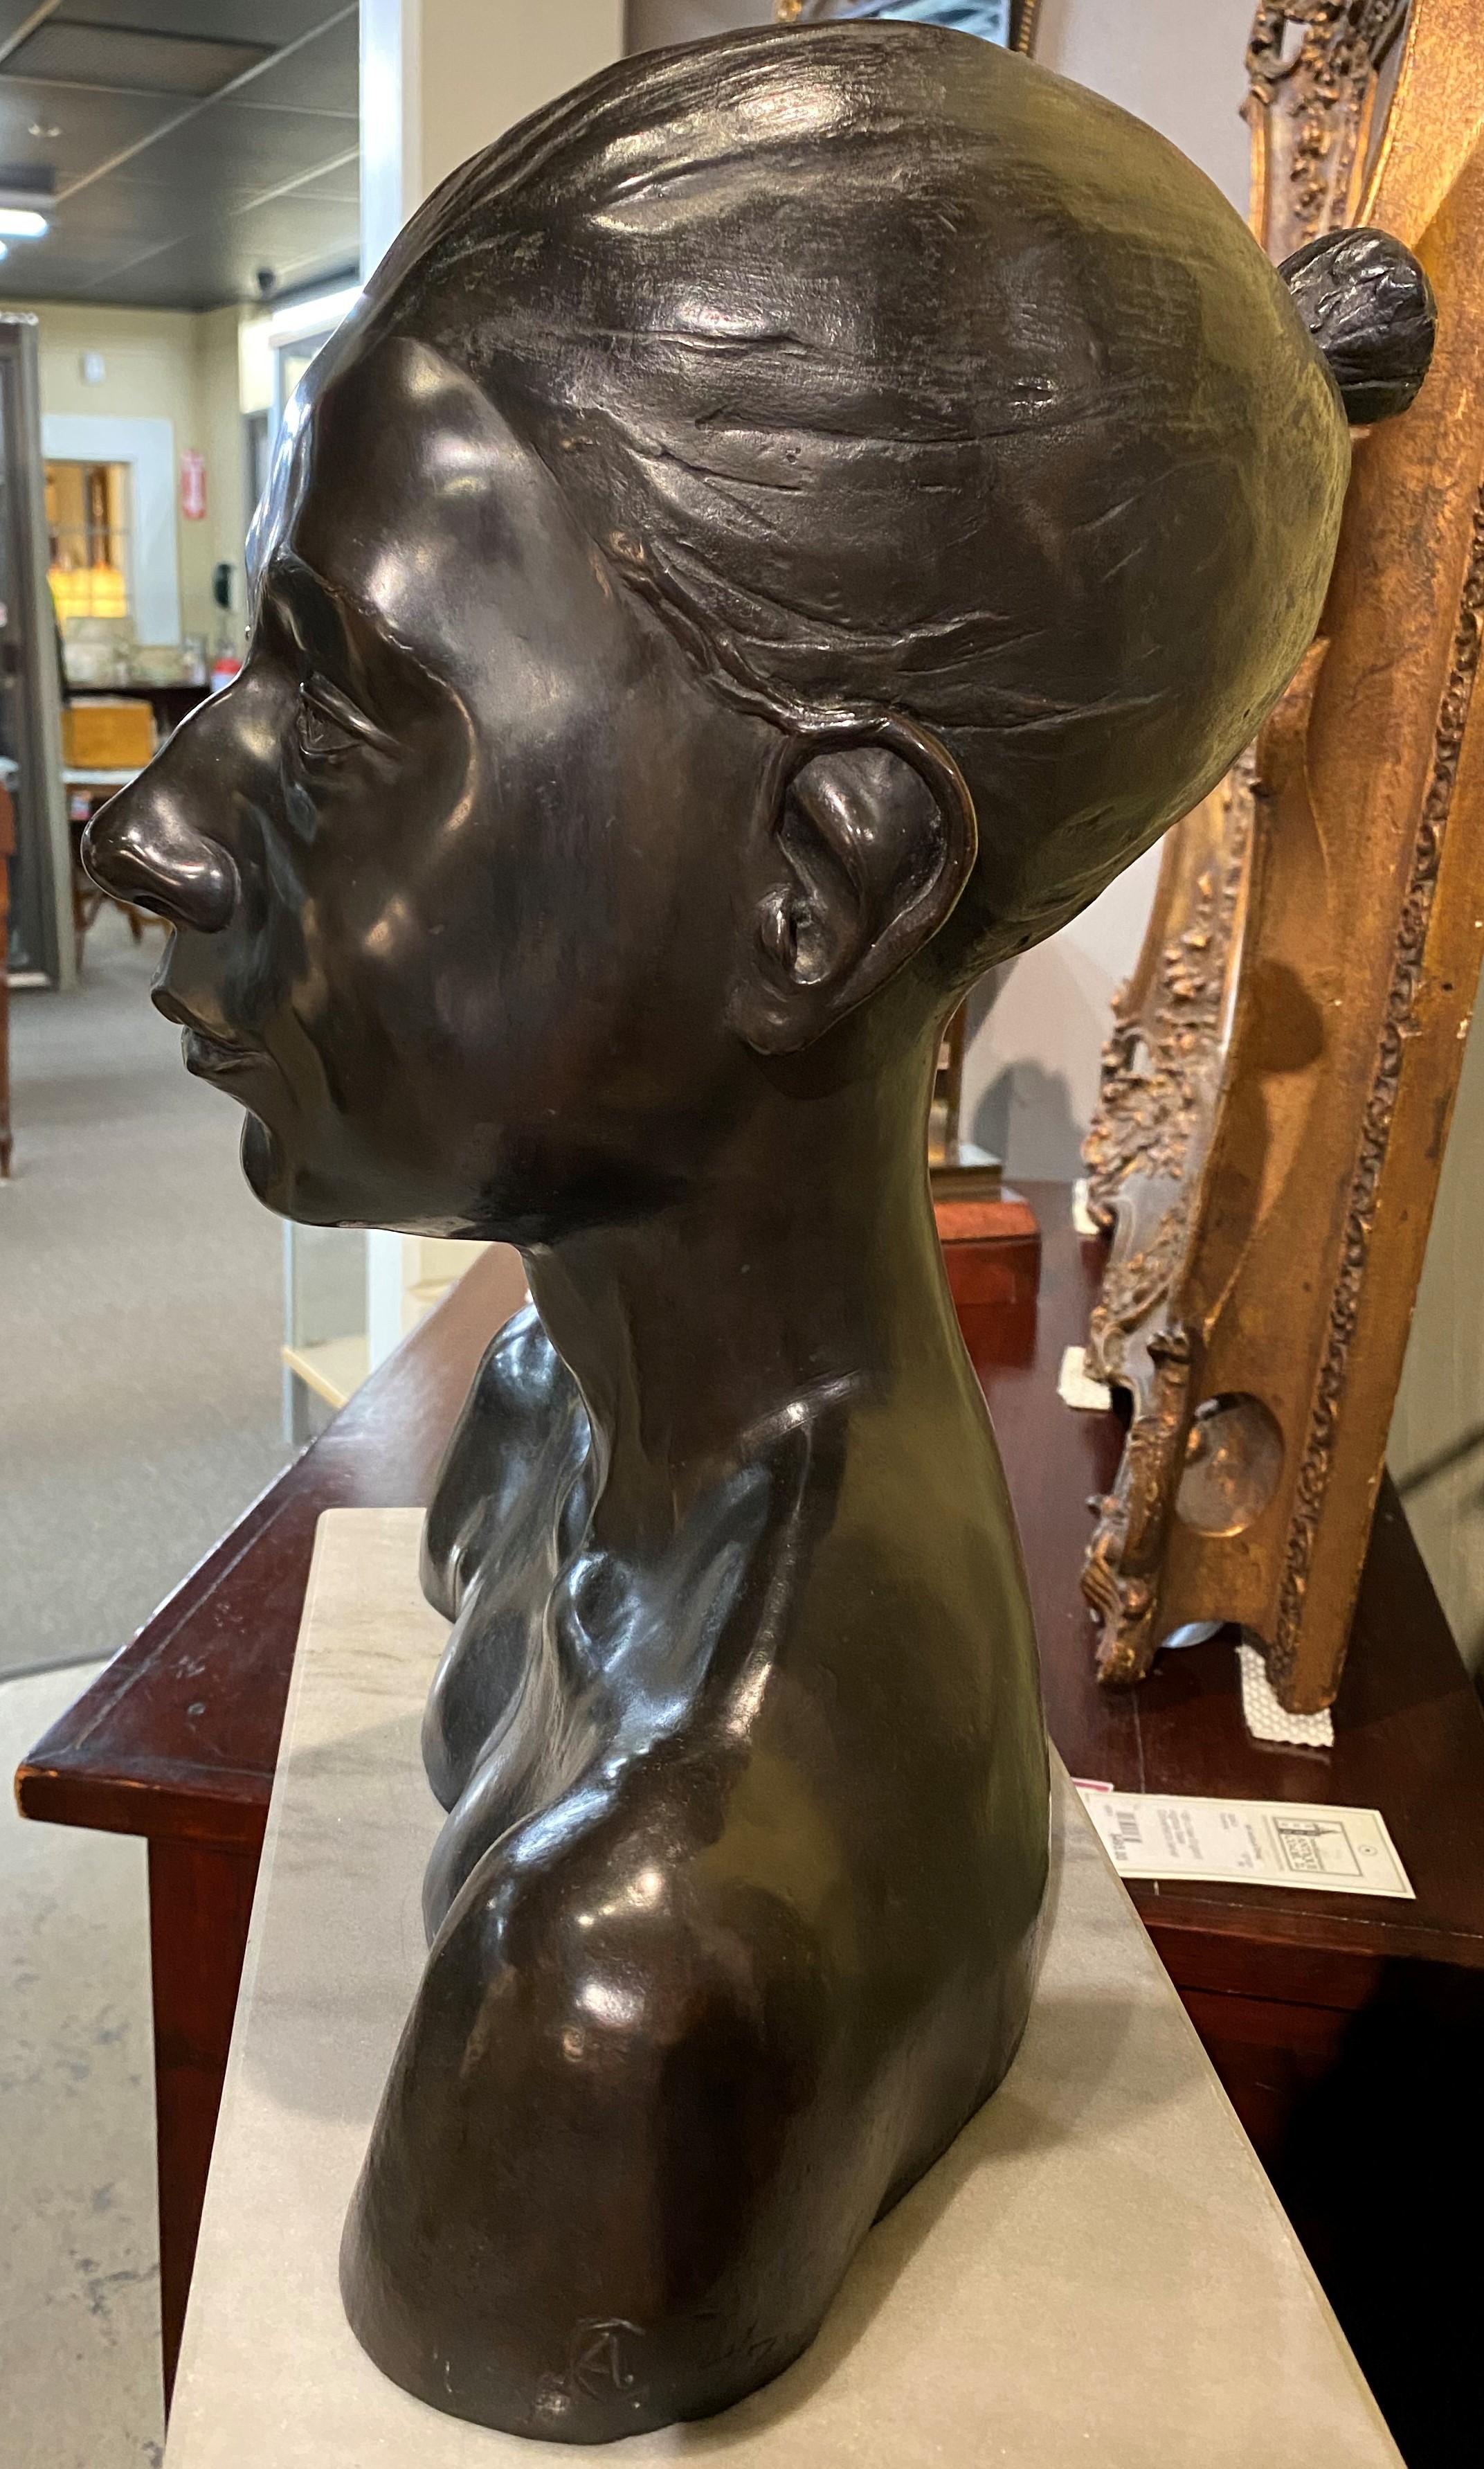 A fine cast patinated bronze bust of a woman with her hair tied back by American artist Andrew Coppola (1941-1992). Coppola was an active artist in Connecticut, known for his  figural sculptures. This bust is monogrammed on the base AC, dated ‘65